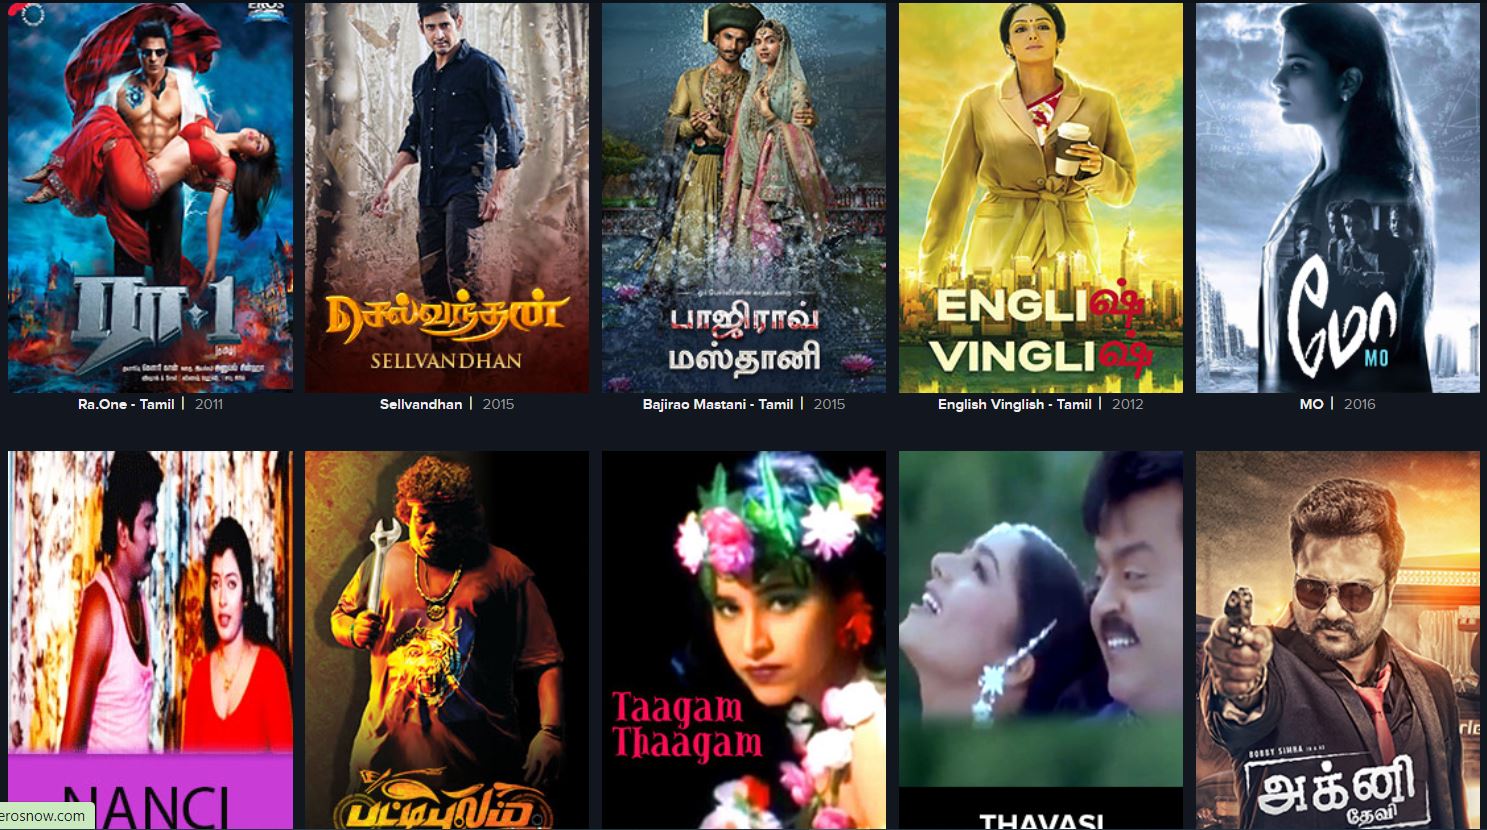 Tamil.Mv.Eu Is An Indian Website Where Users Can Download All Kinds Of Movies And Music